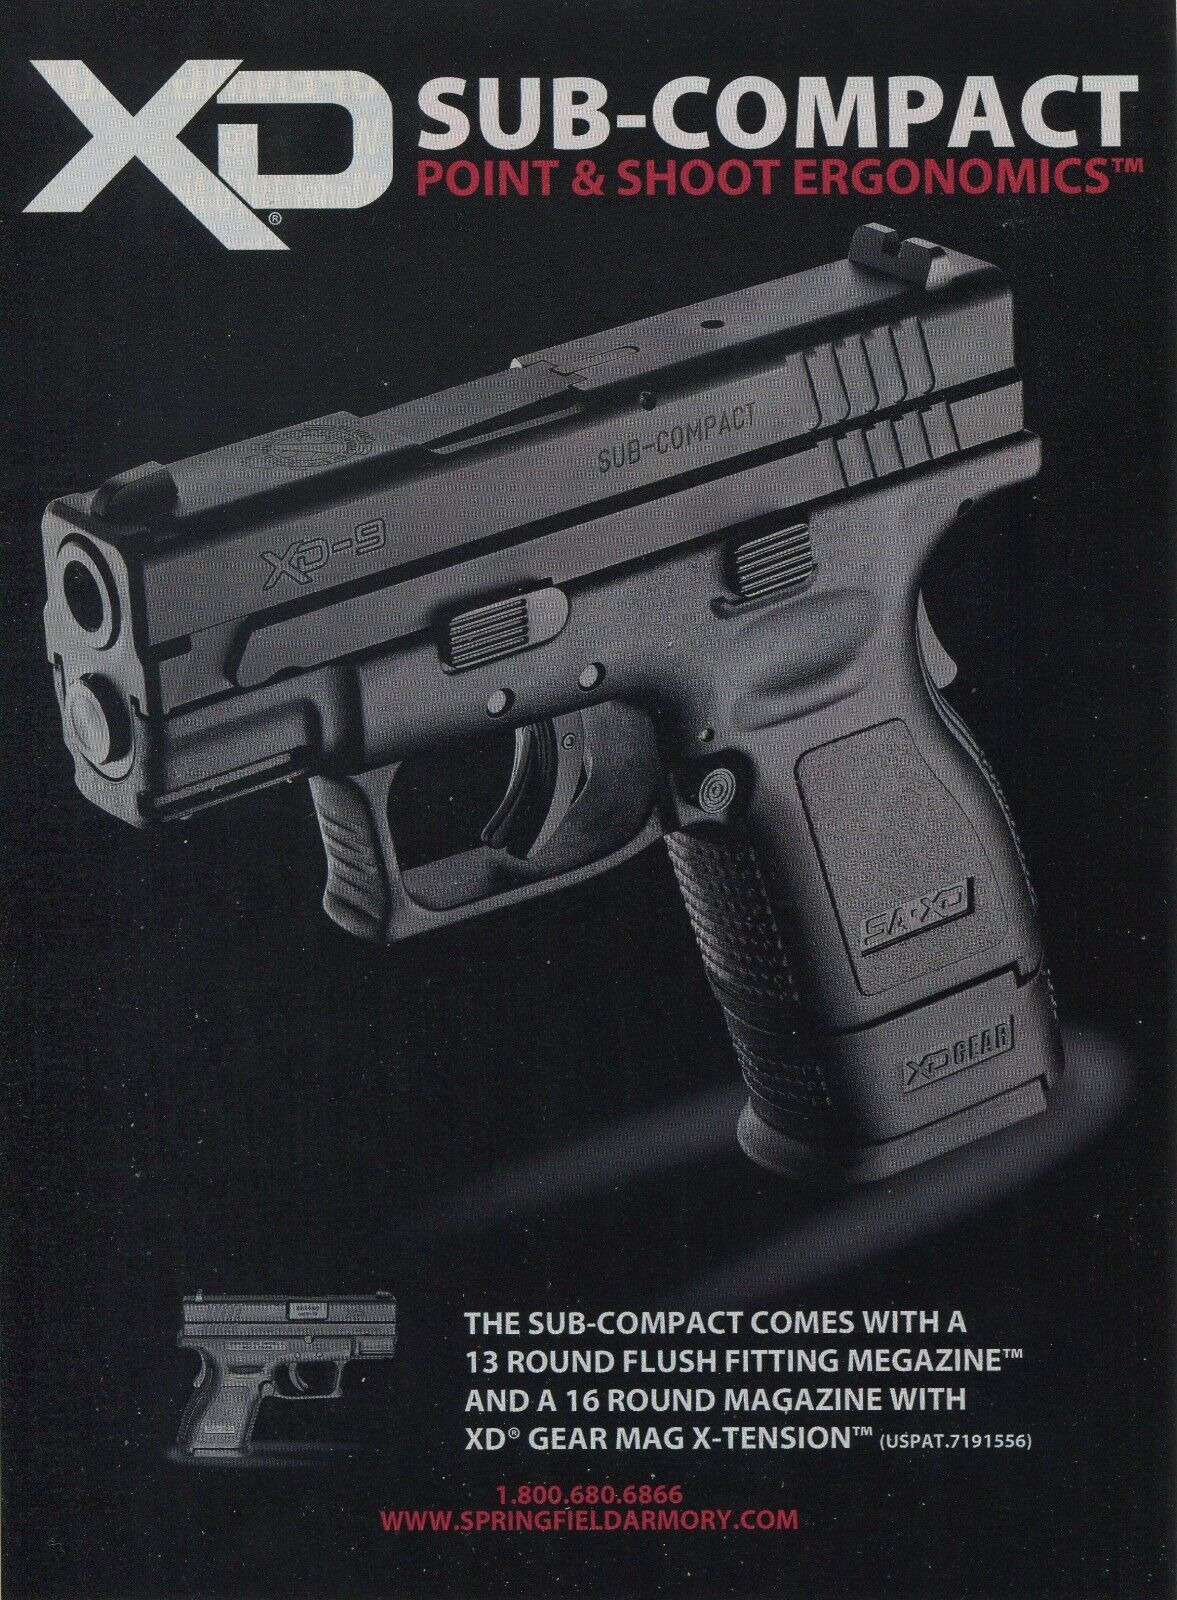 2010 Print Ad of Springfield Armory XD-9 Sub-Compact Pistol